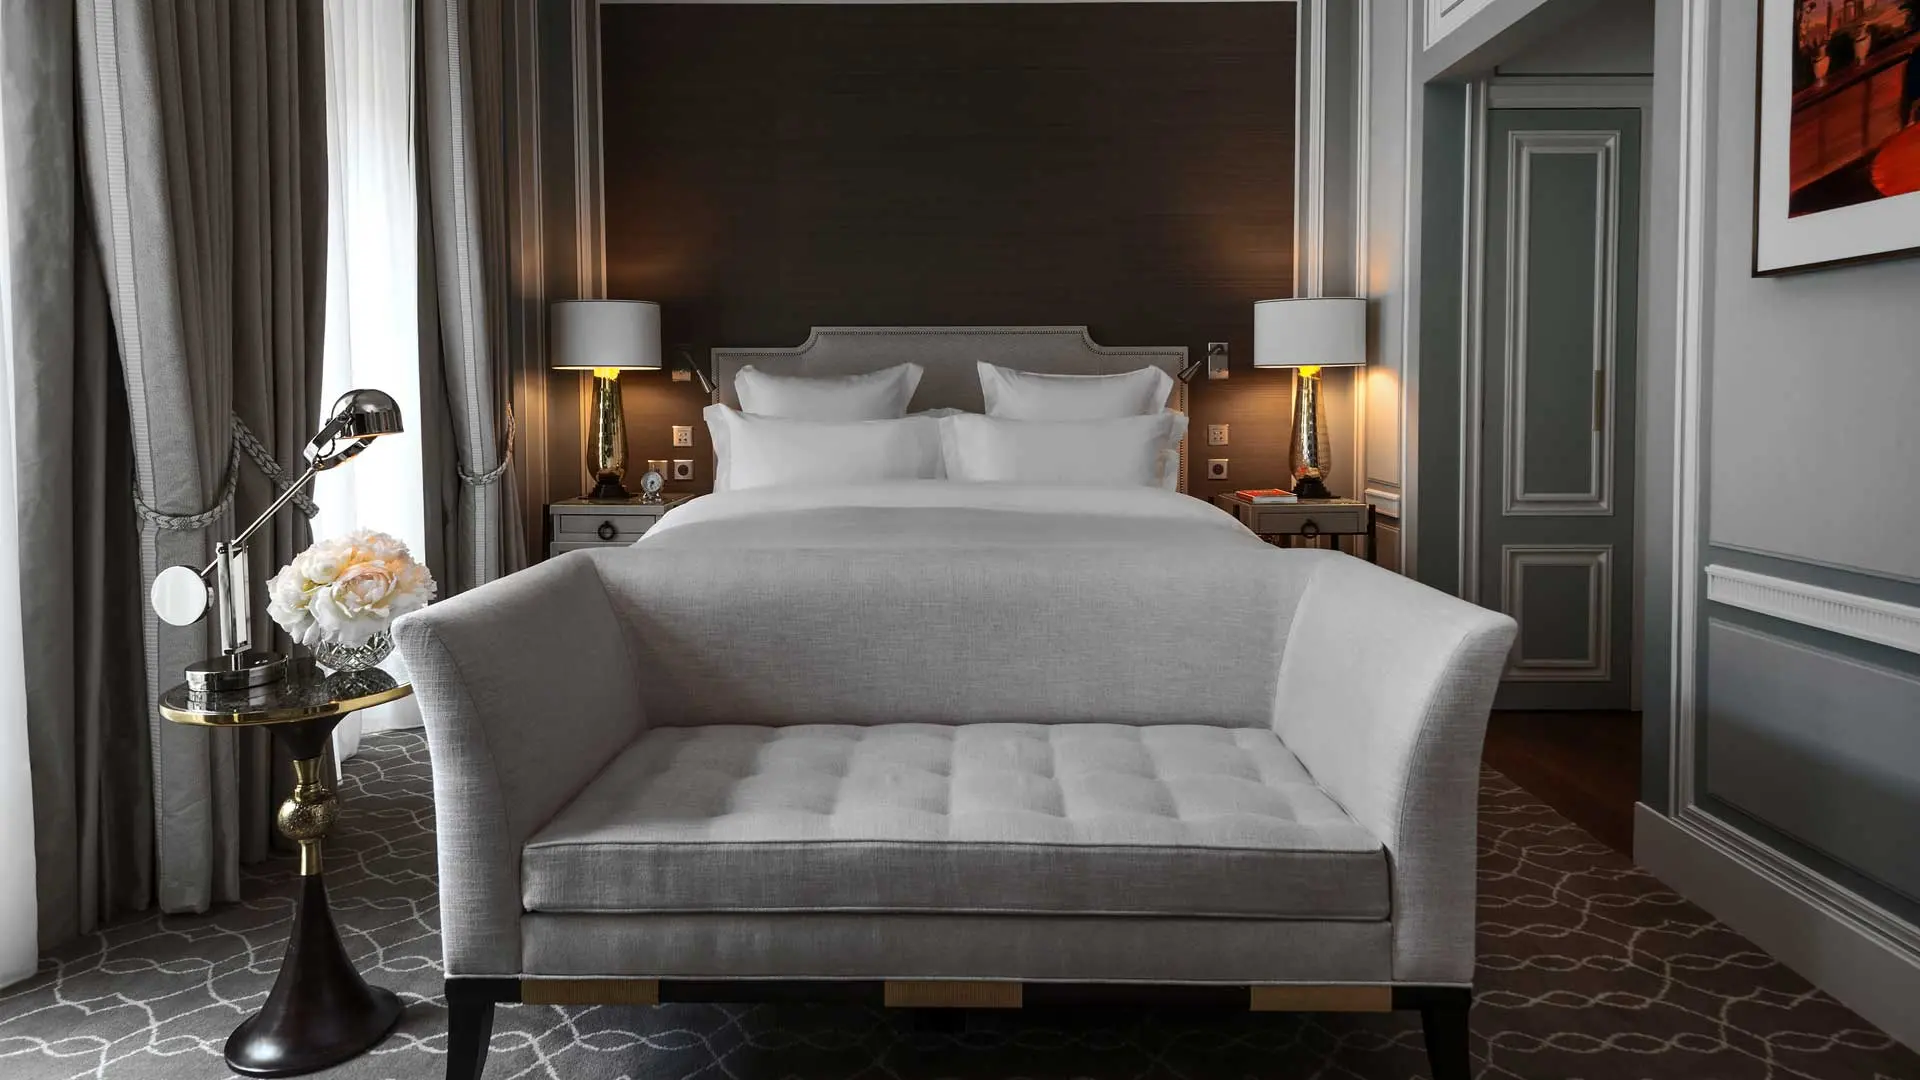 Hotel review Accommodation' - Hôtel de Crillon, A Rosewood Hotel  - 3